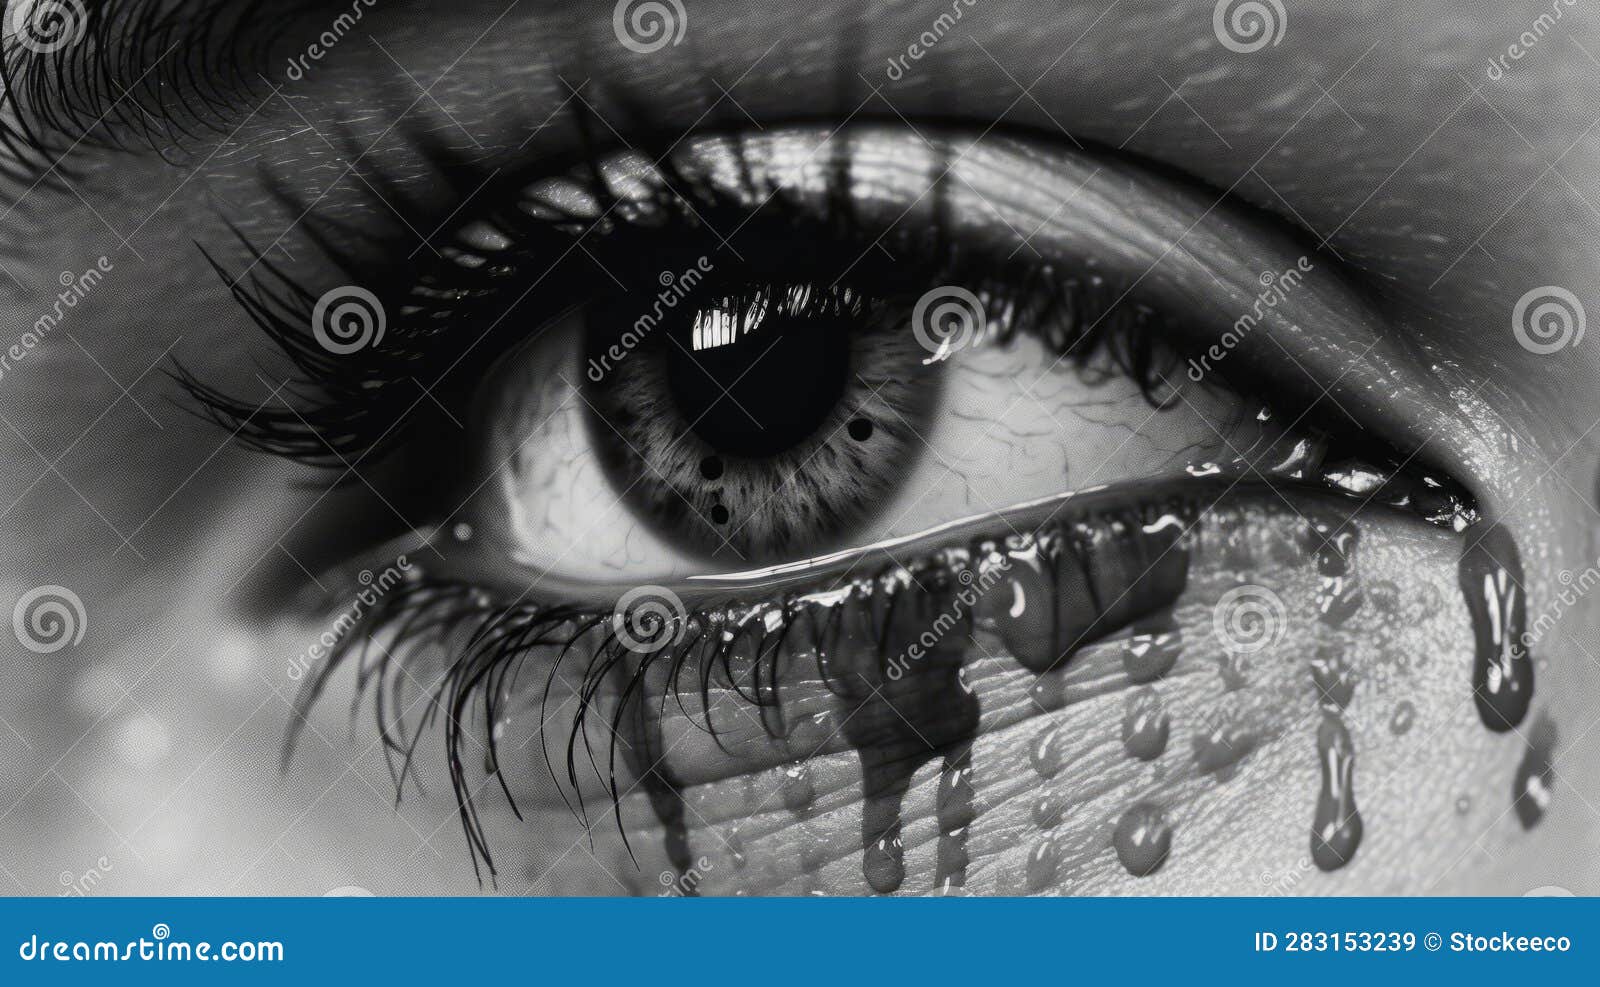 my tears ricochet monochrome photo realistic depiction teary eye woman captured black white using paint dripping 283153239